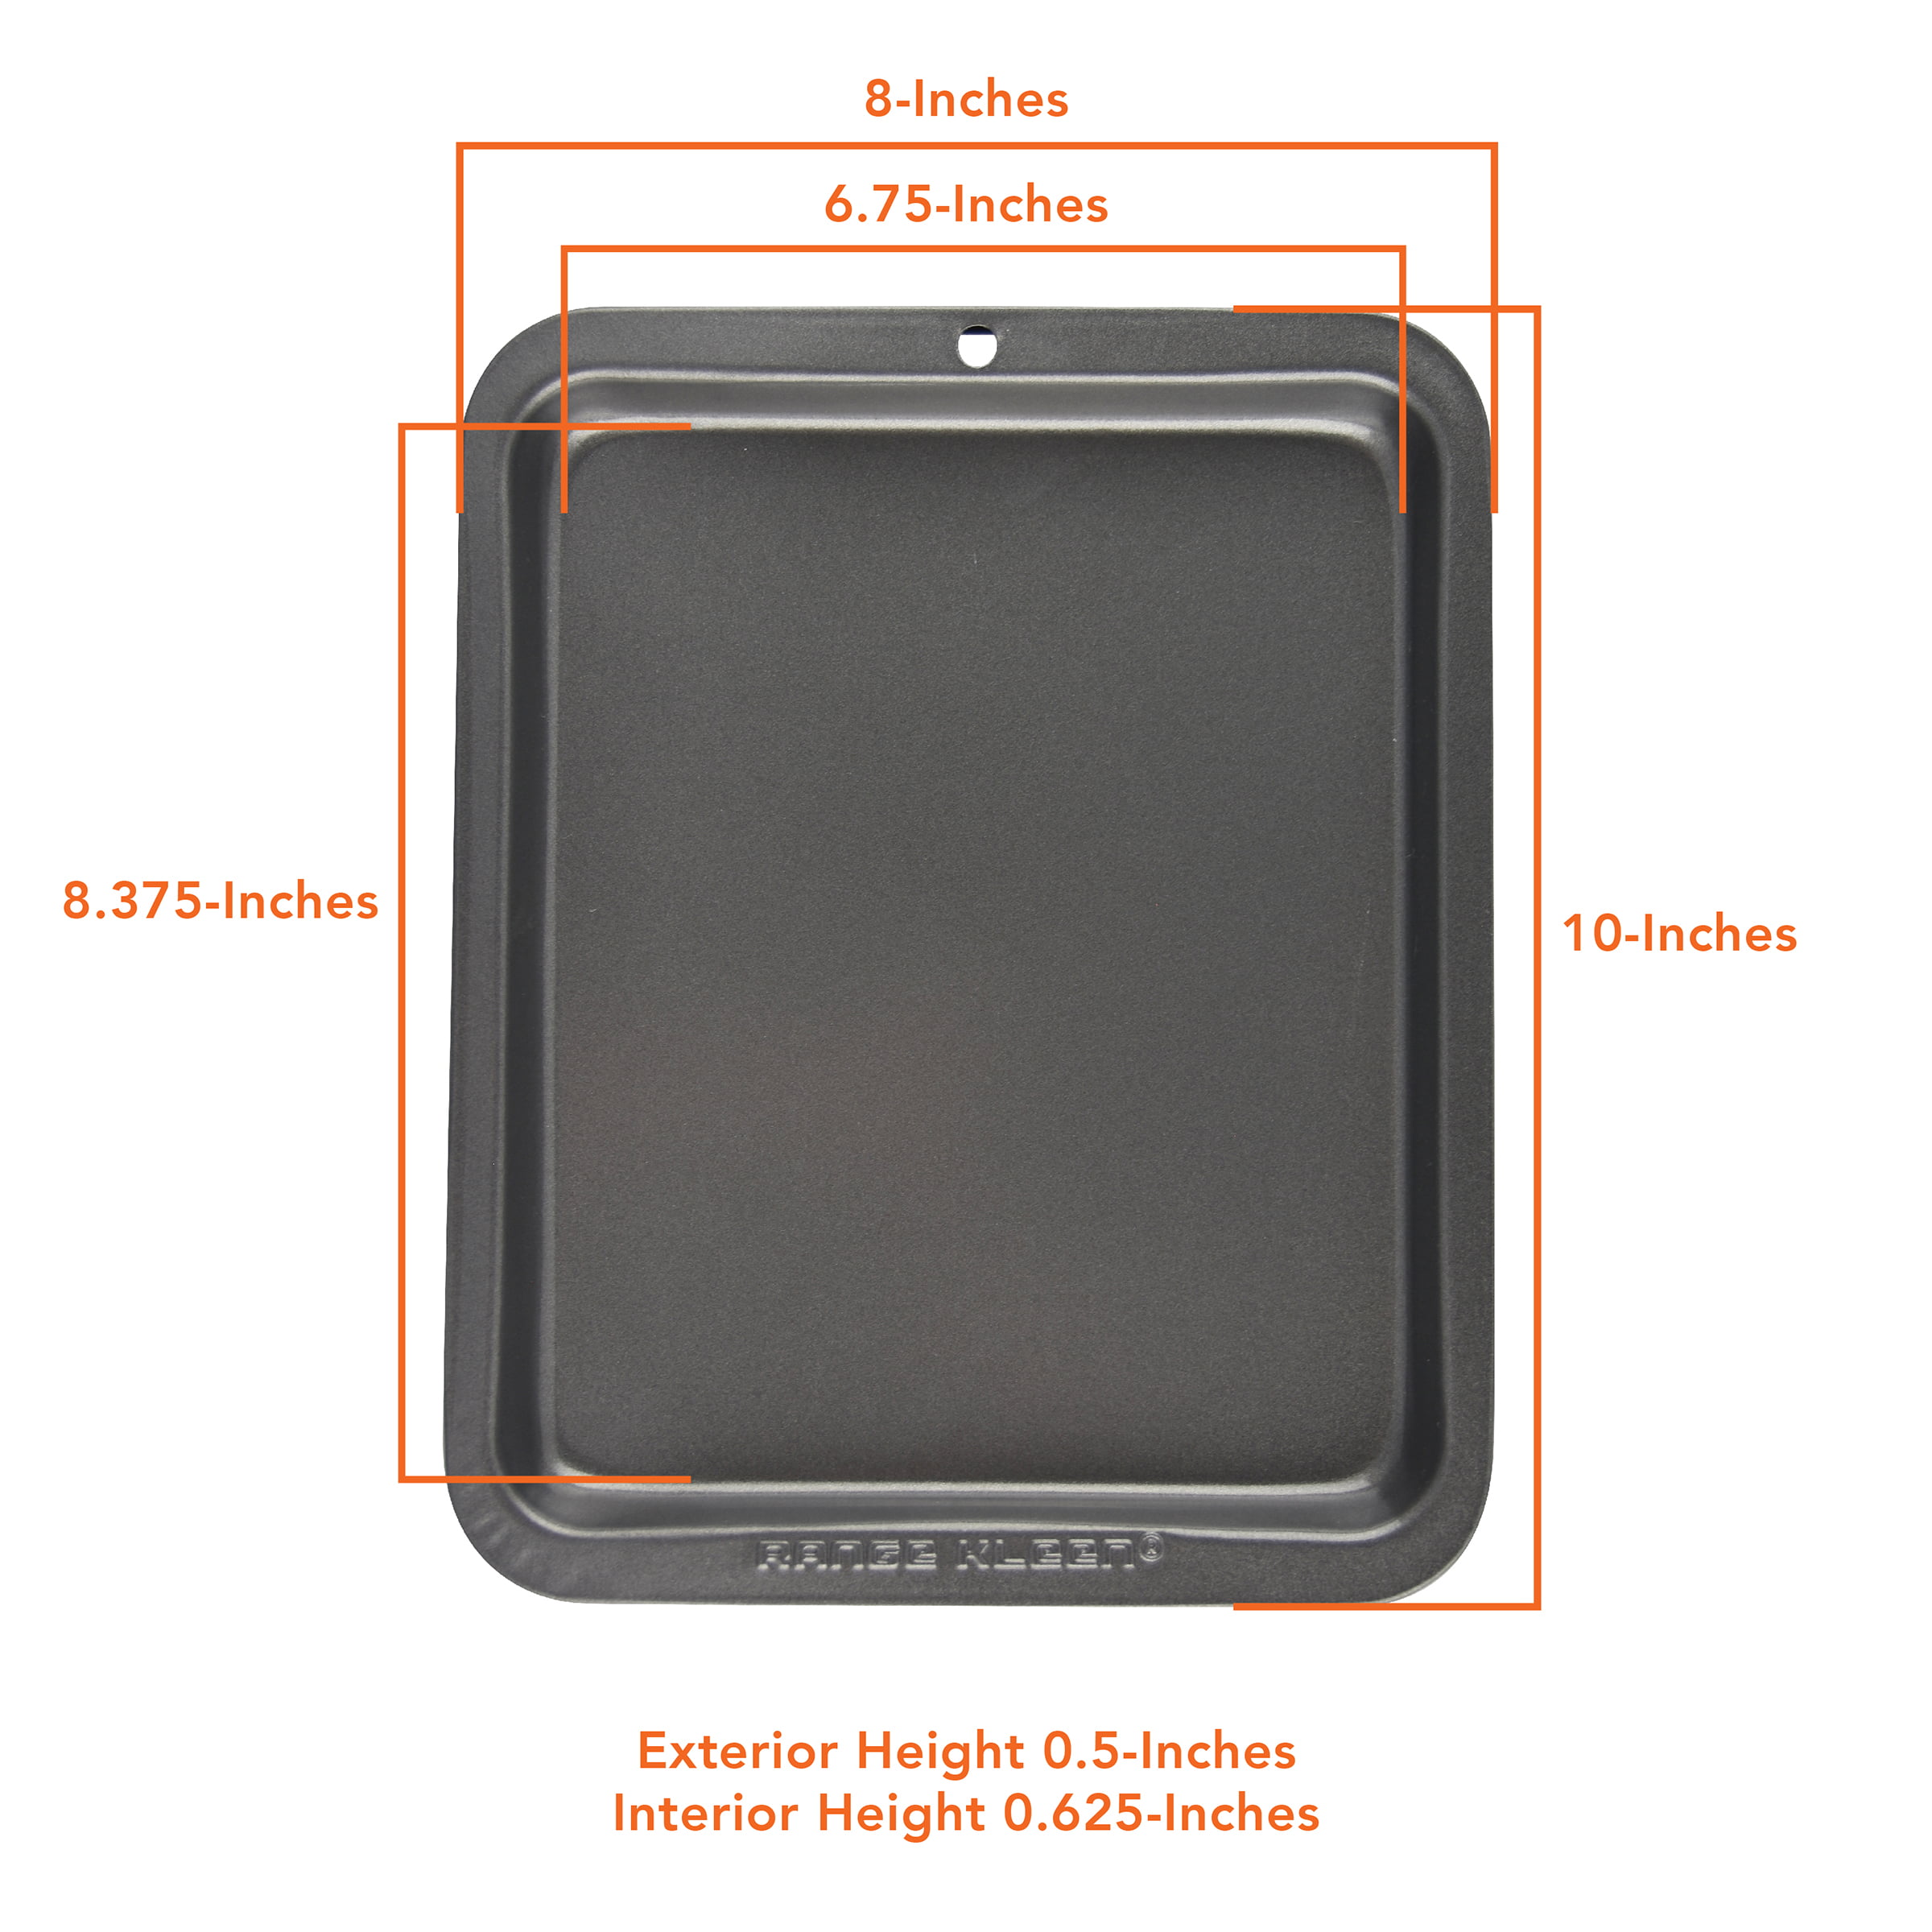 Range Kleen Petite Cookie Sheet Non-Stick 8x10 in. - Outer